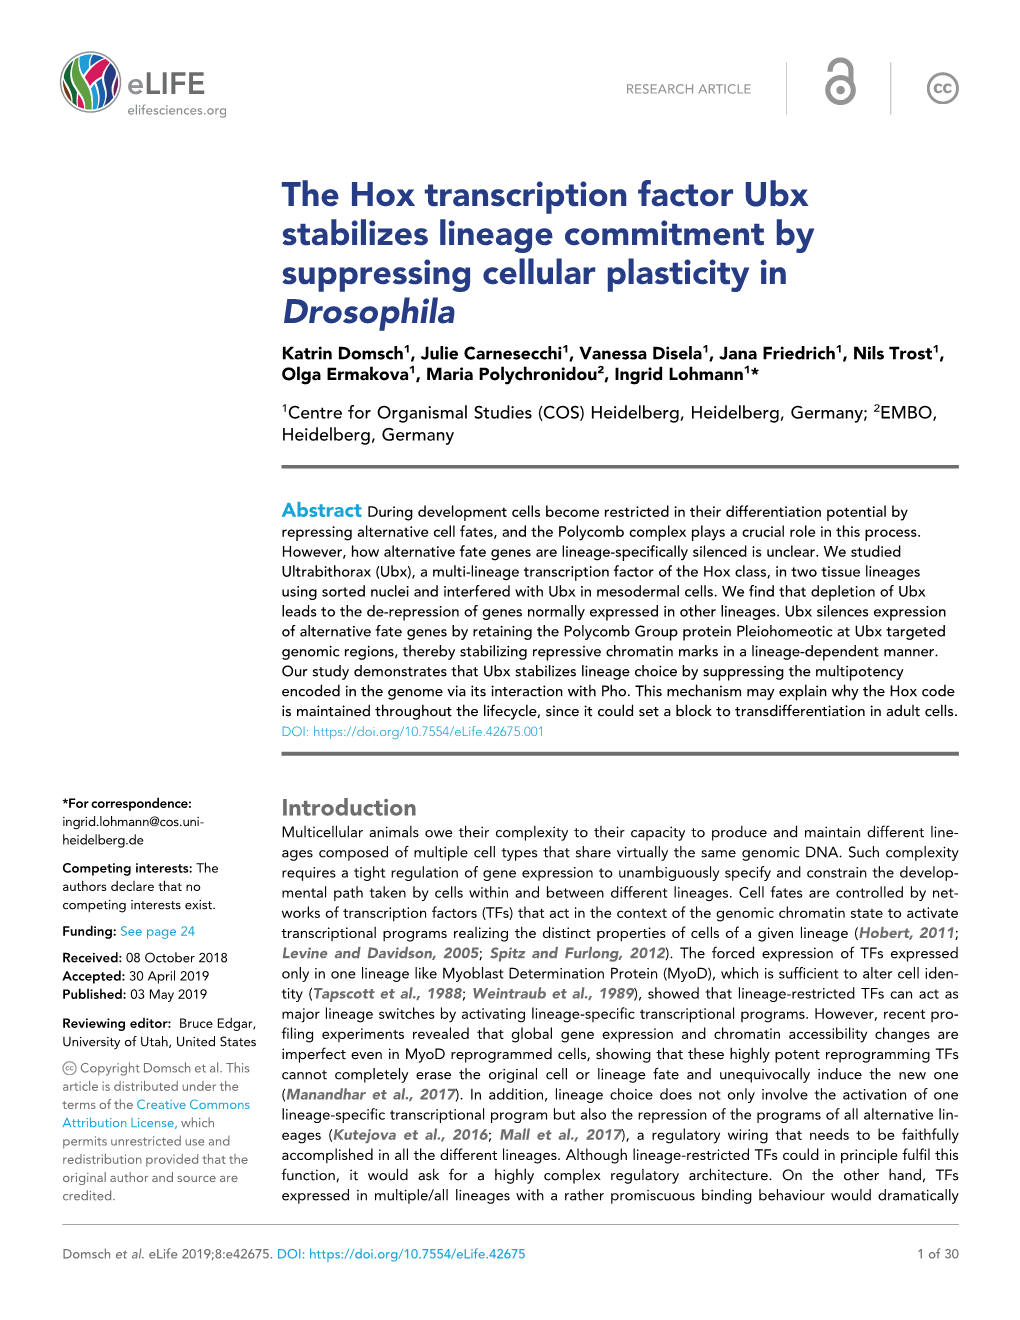 The Hox Transcription Factor Ubx Stabilizes Lineage Commitment By